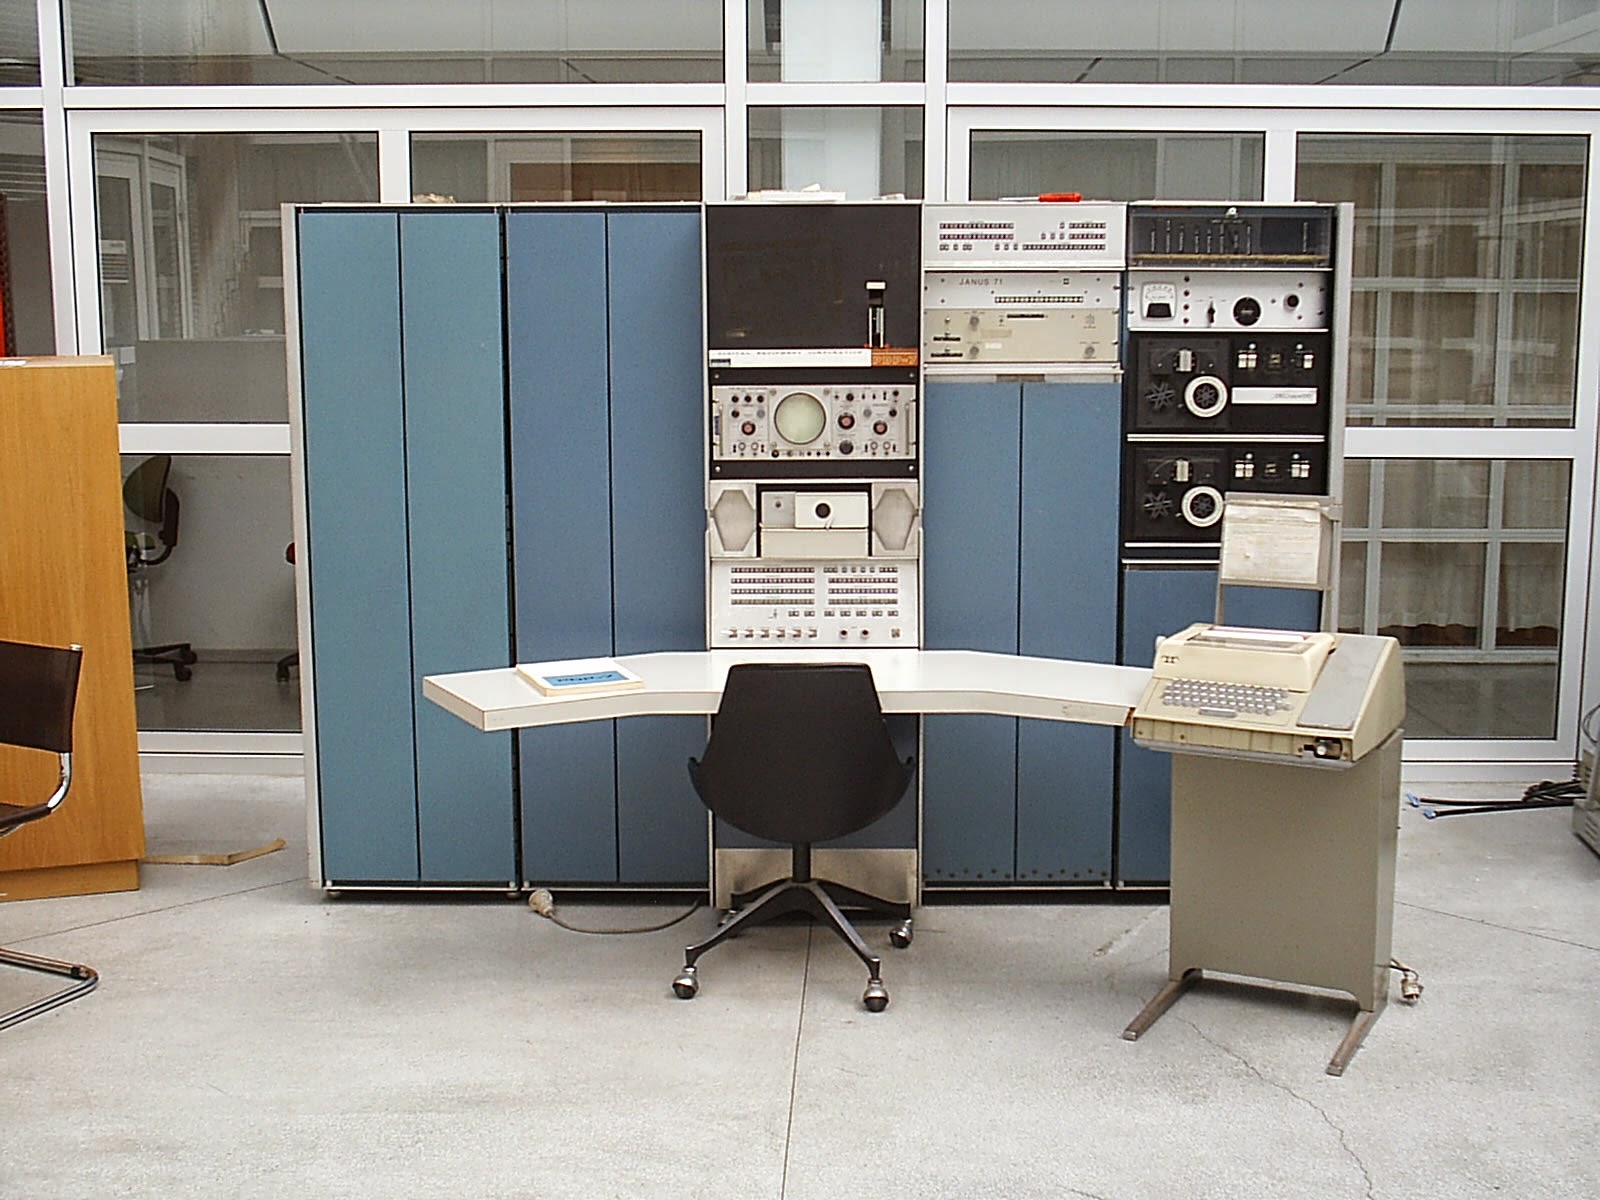 An old PDP-7 - a powerhouse in its heyday - being restored in Oslo, Norway - en:User:Toresbe, CC SA 1.0 via Wikimedia Commons